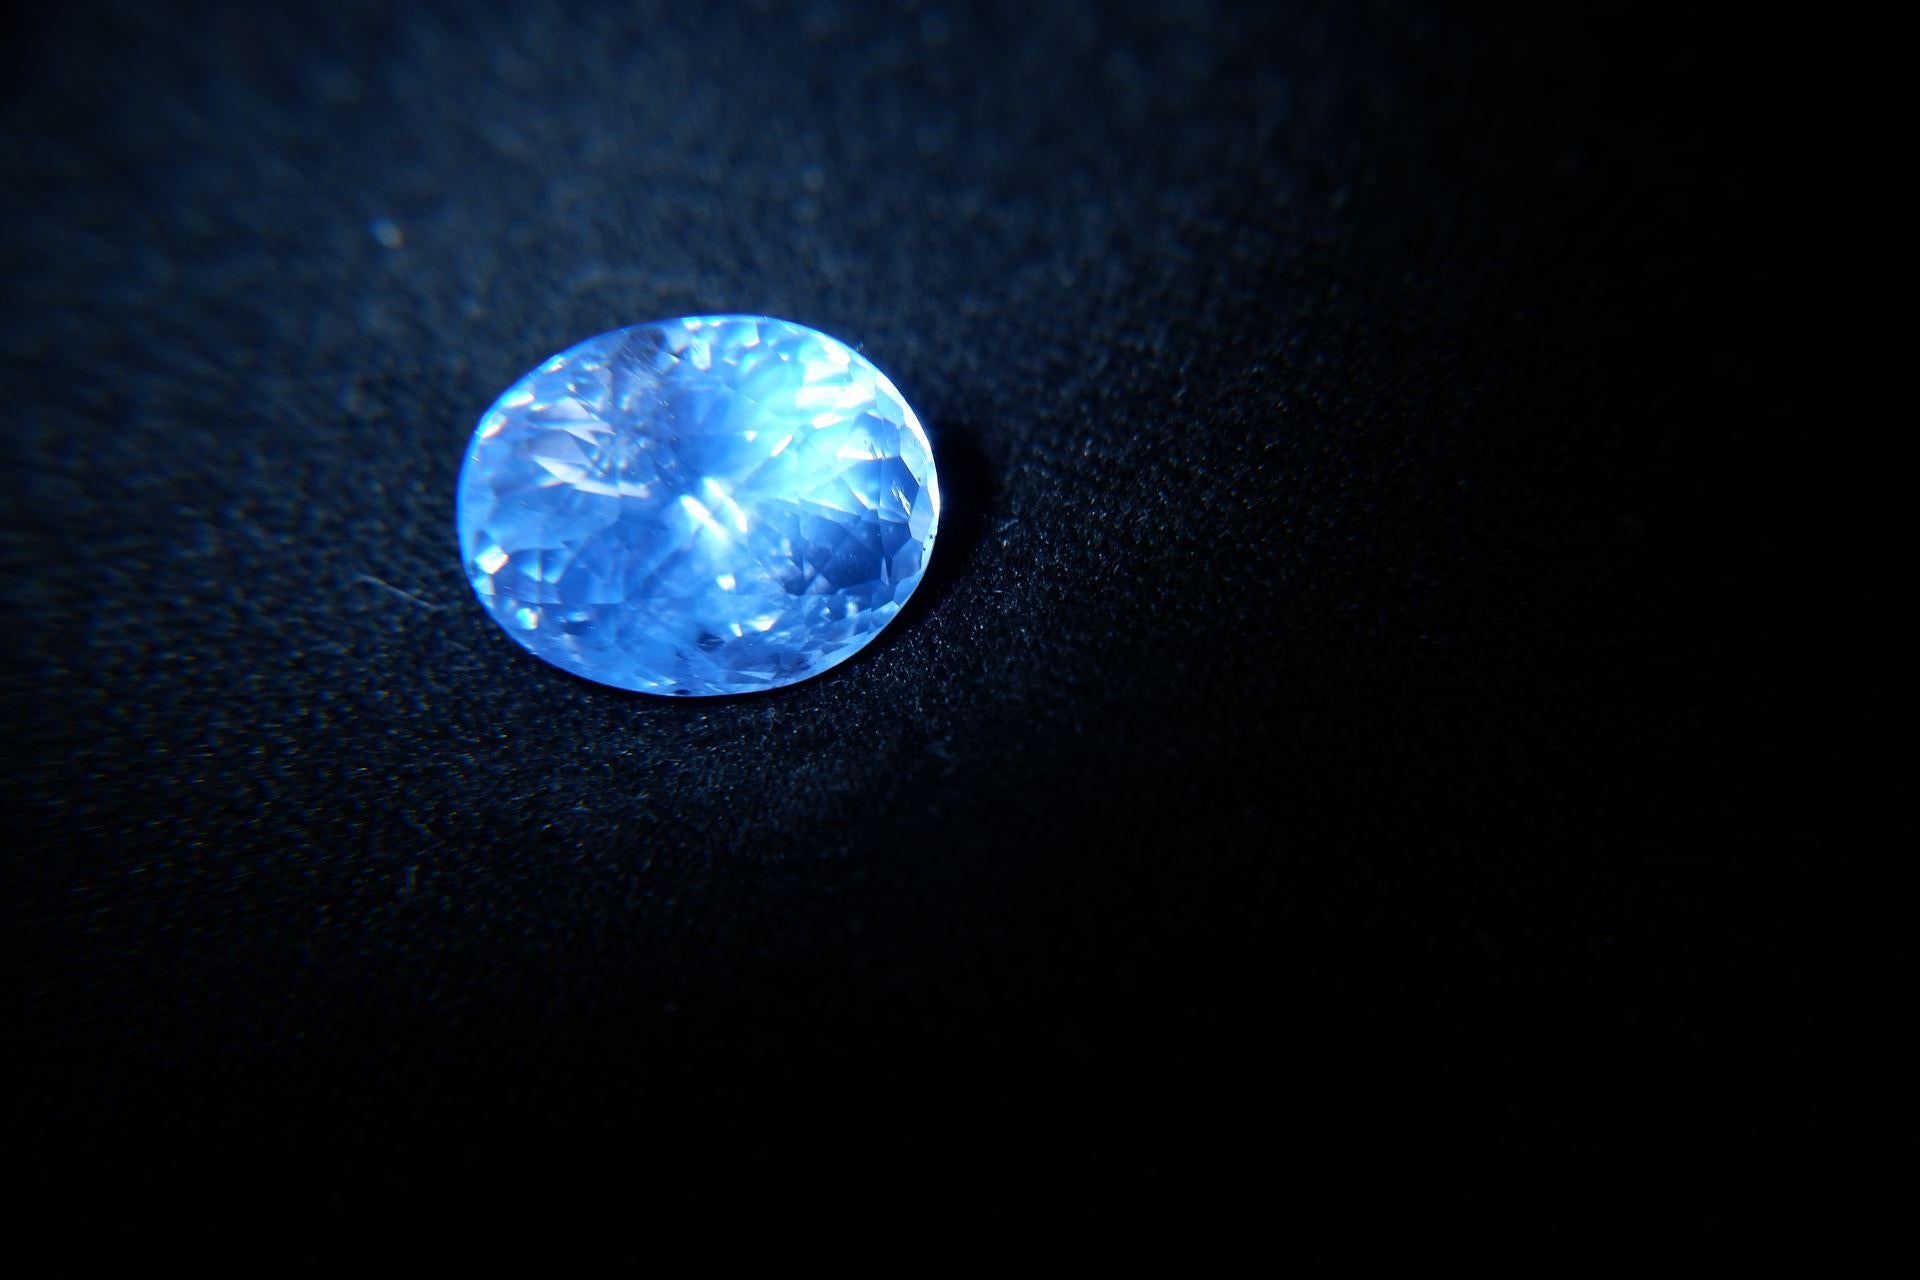 Oval Cut 3.16 ct Vivid Blue Sapphire, Ceylon, Handcrafted, GIA For Sale